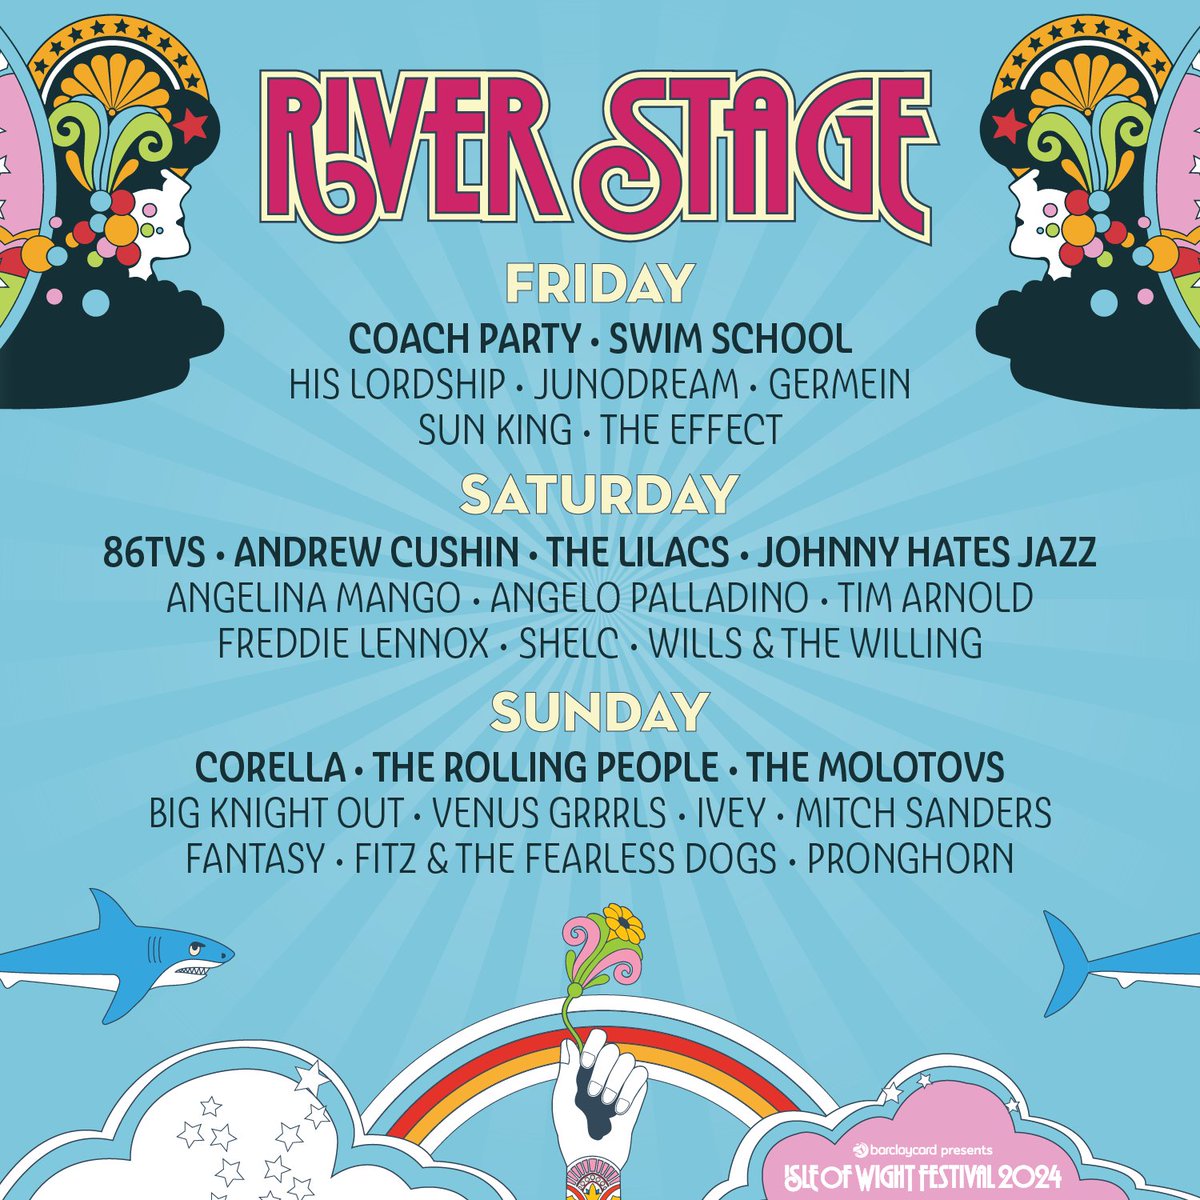 River Stage is back and here are your day splits🤩 What new music will you find over #IOW2024 weekend?👀For more info, visit this link: isleofwightfestival.com/areas/river-st… #BarclaycardxIOW